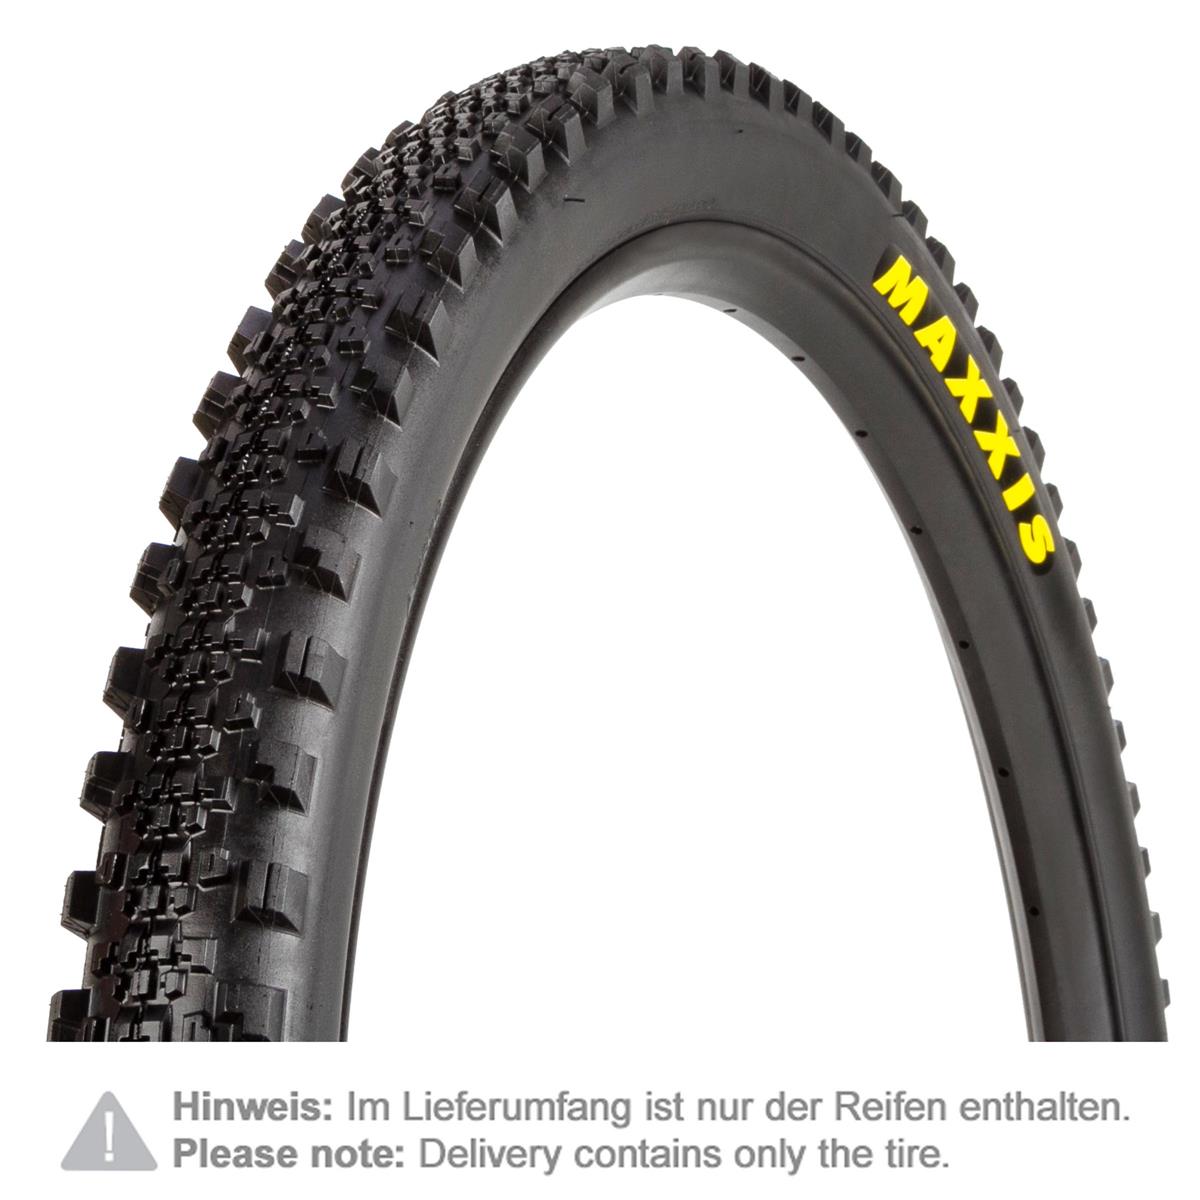 which maxxis mtb tyre